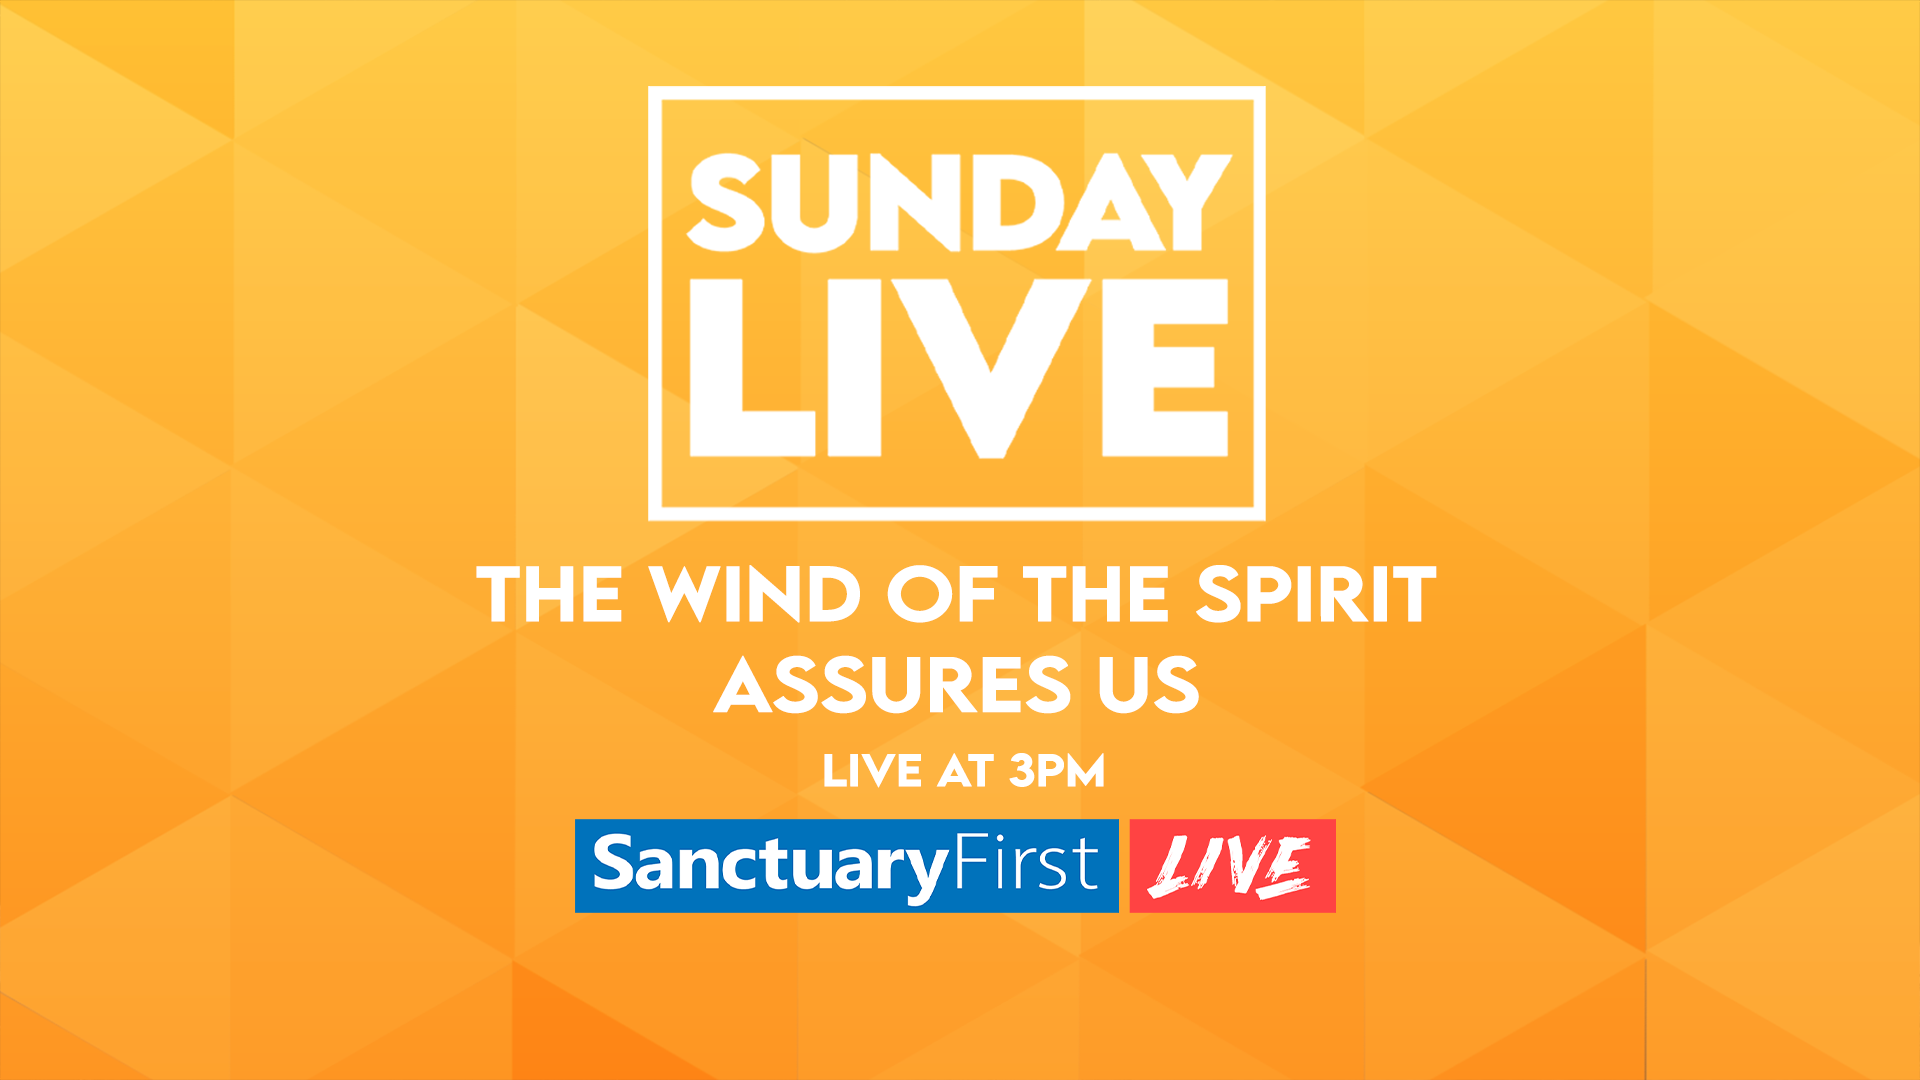 Sunday Live - The Wind of the Spirit assures us